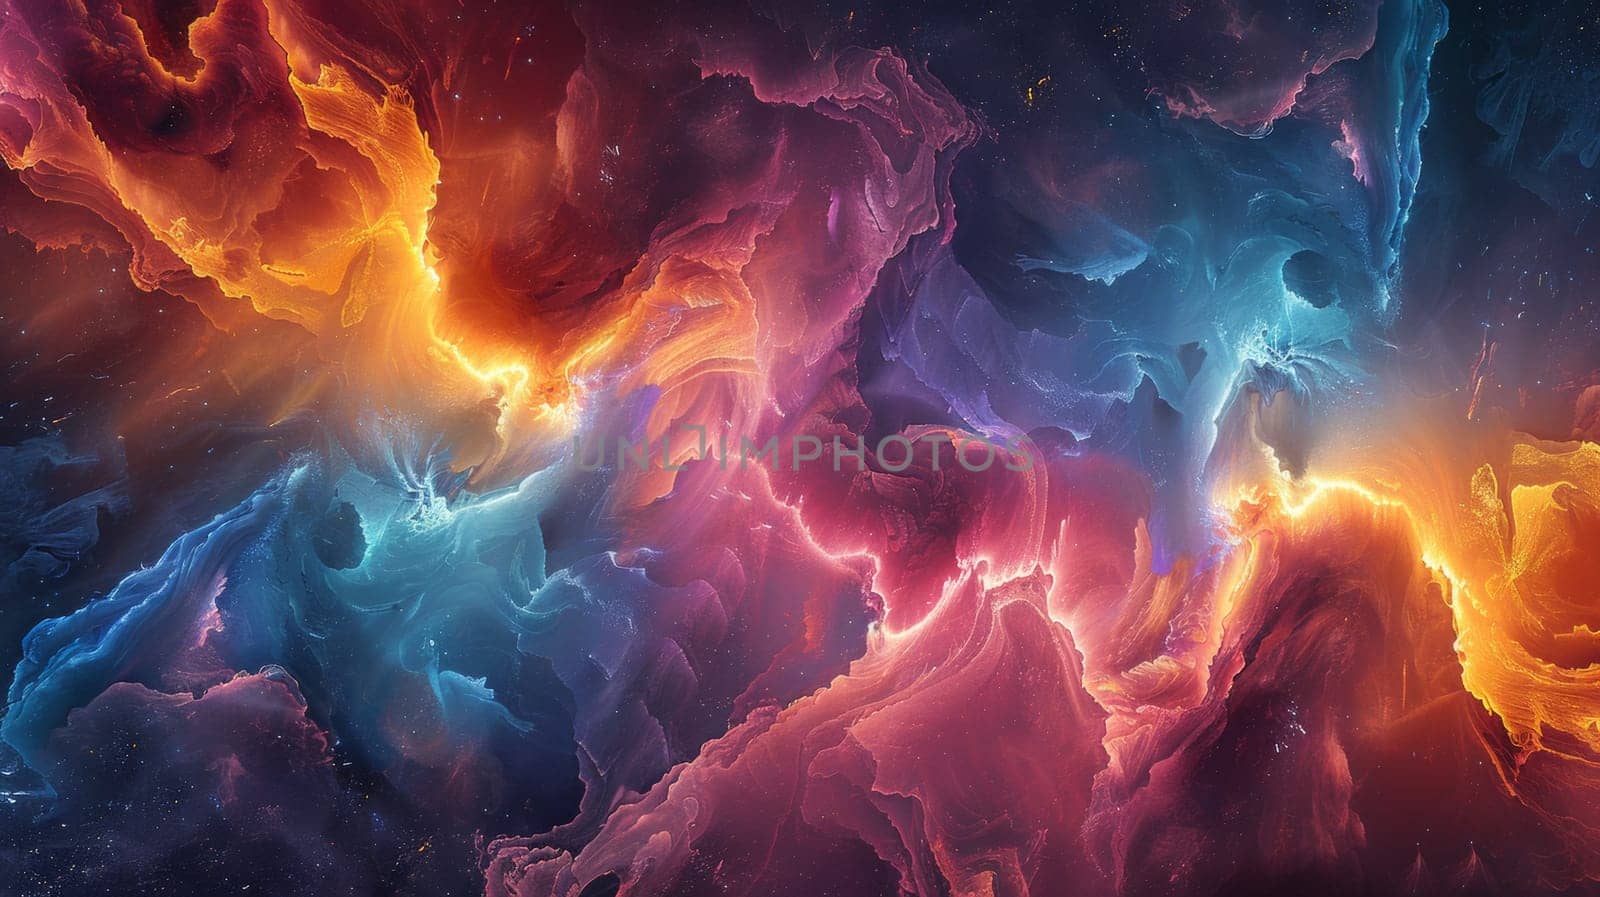 A colorful abstract painting of a space scene with many colors, AI by starush